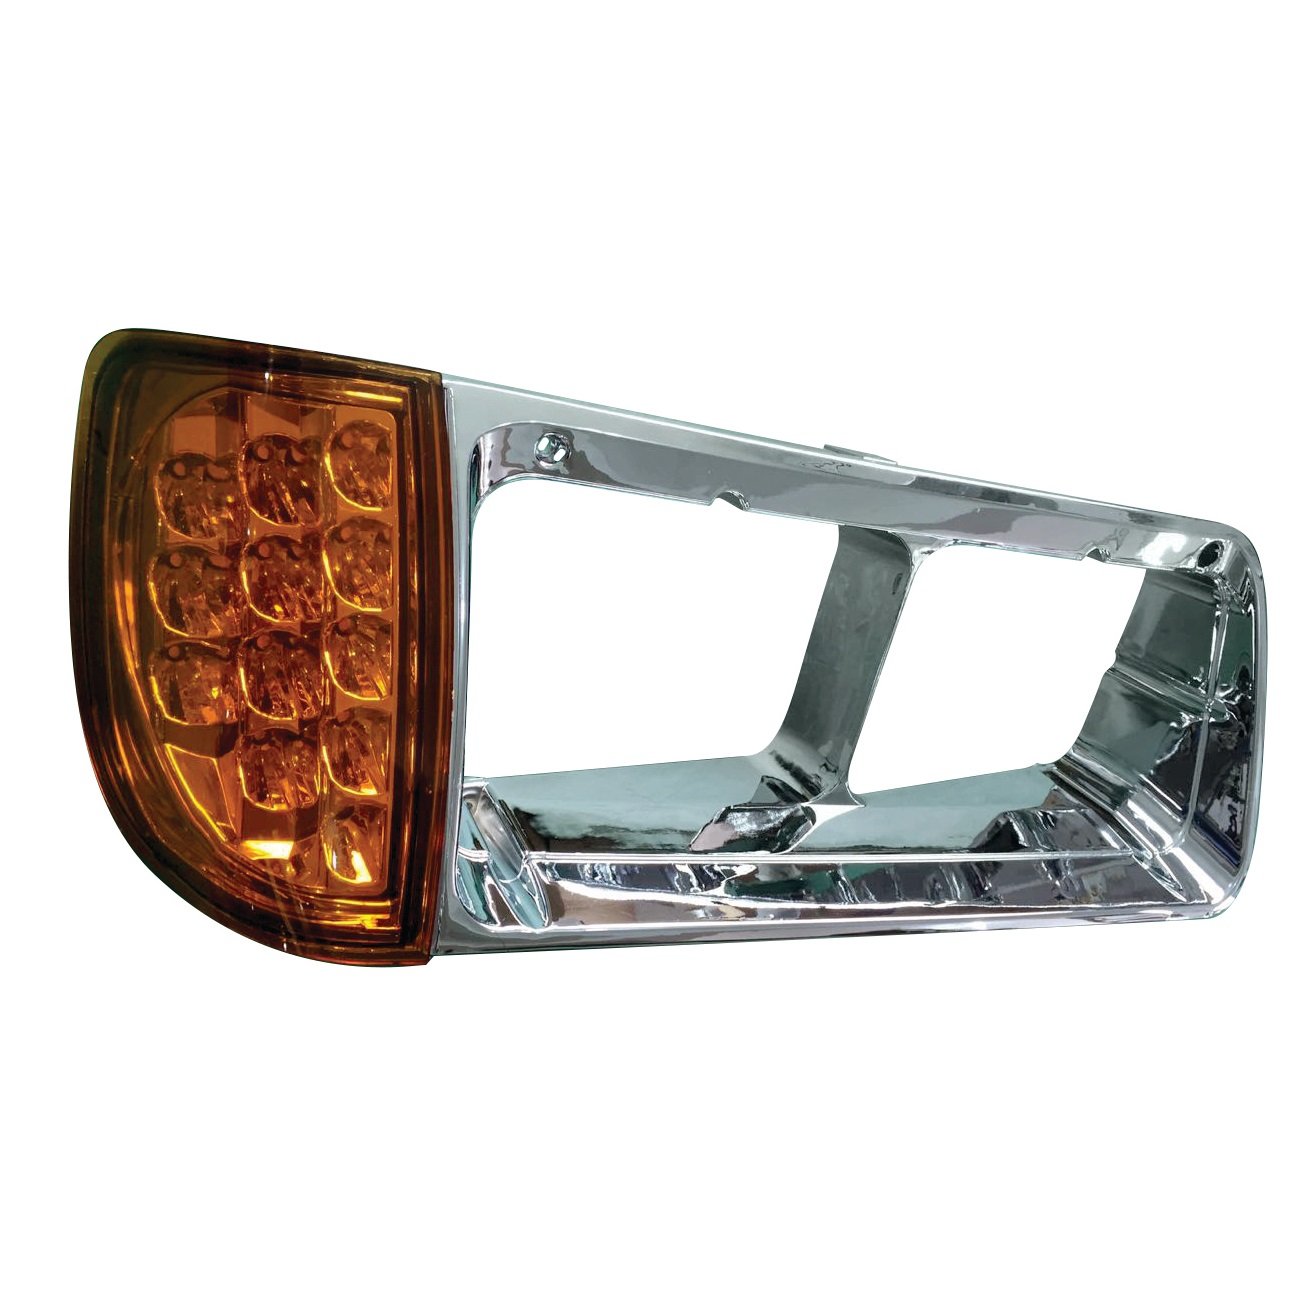 Fortpro Led Turn Signal Assembly & Bezel For Freightliner FLD Headlights Replaces A06-20738-000/A06-20738-001